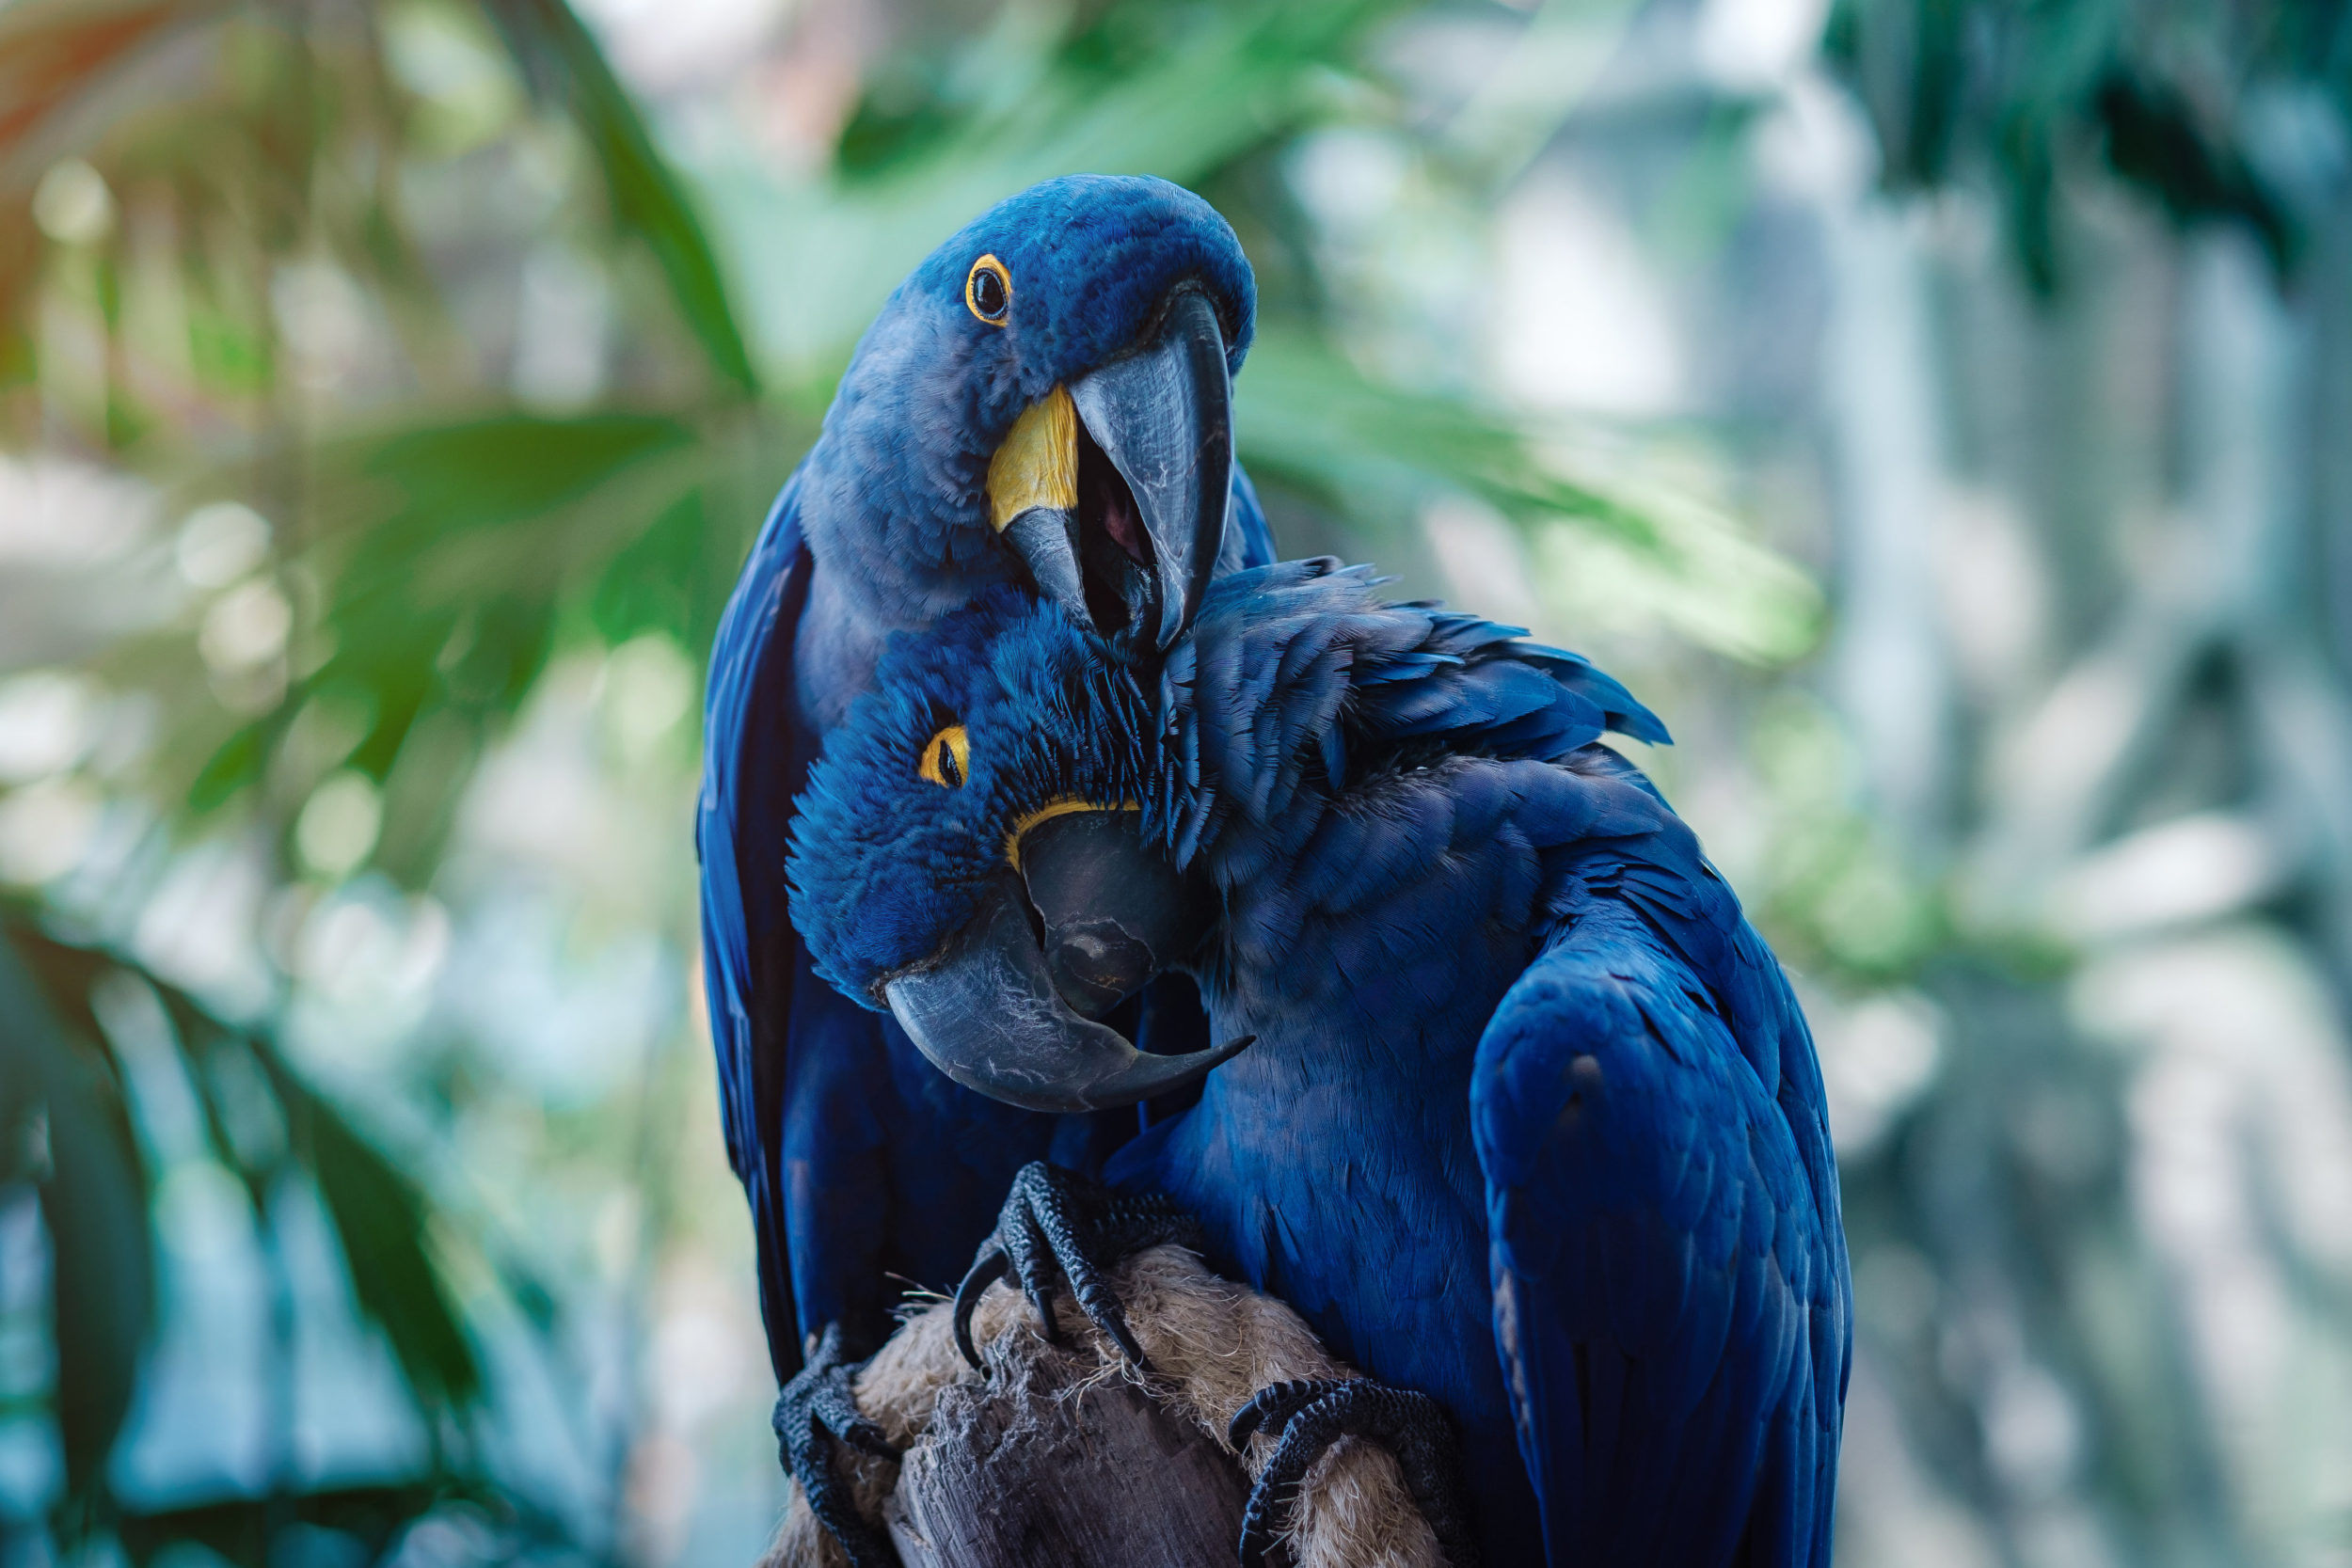 Couple Of Blue Hyacinth Macaw Parrot In Park